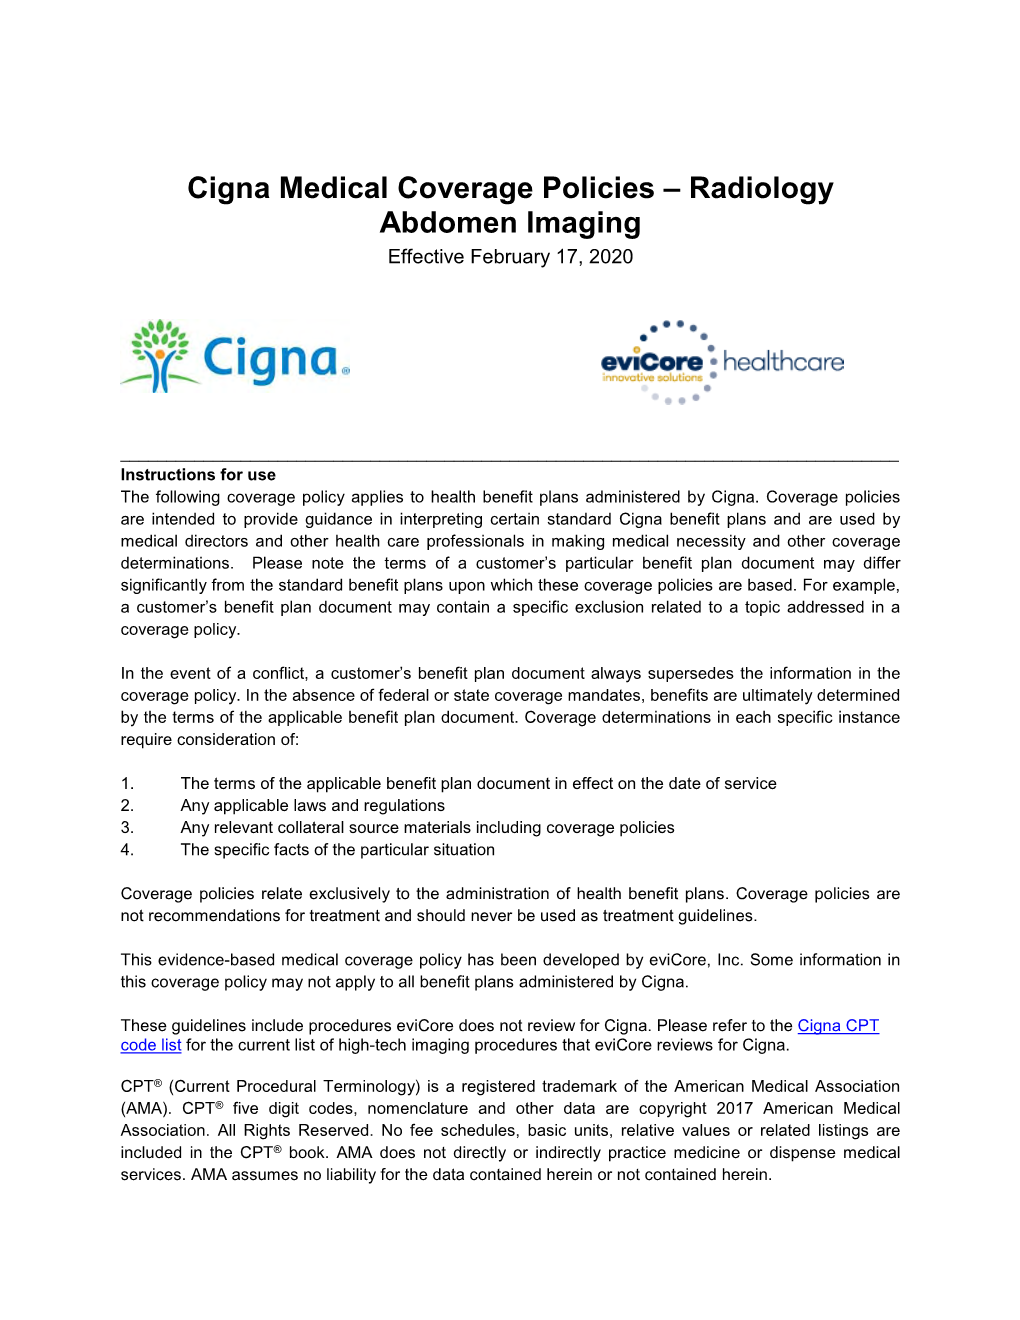 Cigna Medical Coverage Policies – Radiology Abdomen Imaging Effective February 17, 2020